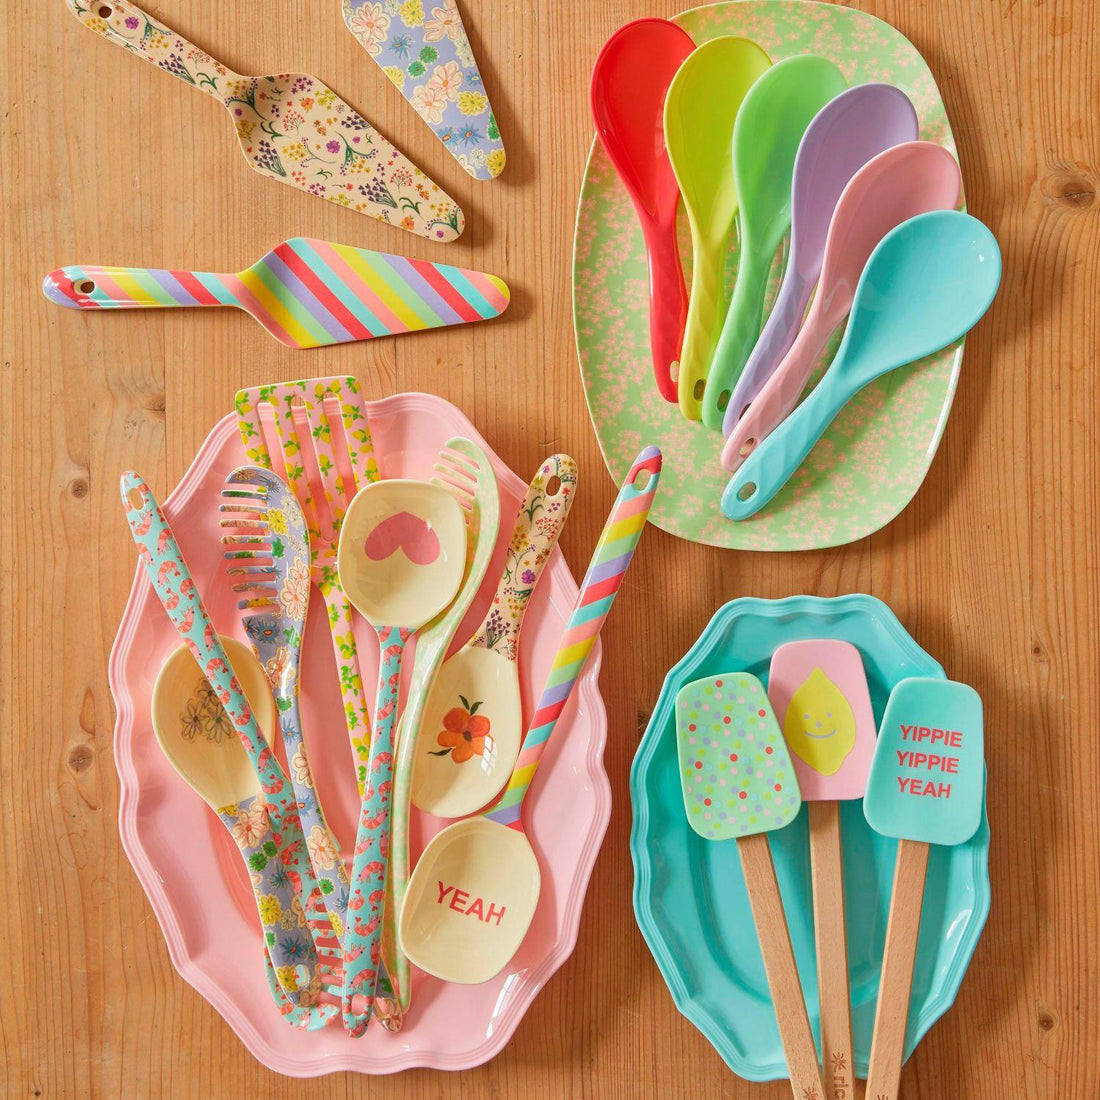 rice-dk-melamine-salad-spoon-yippie-yippie-yeah-prints-1pc-rice-mesal-ss22xcp- (5)